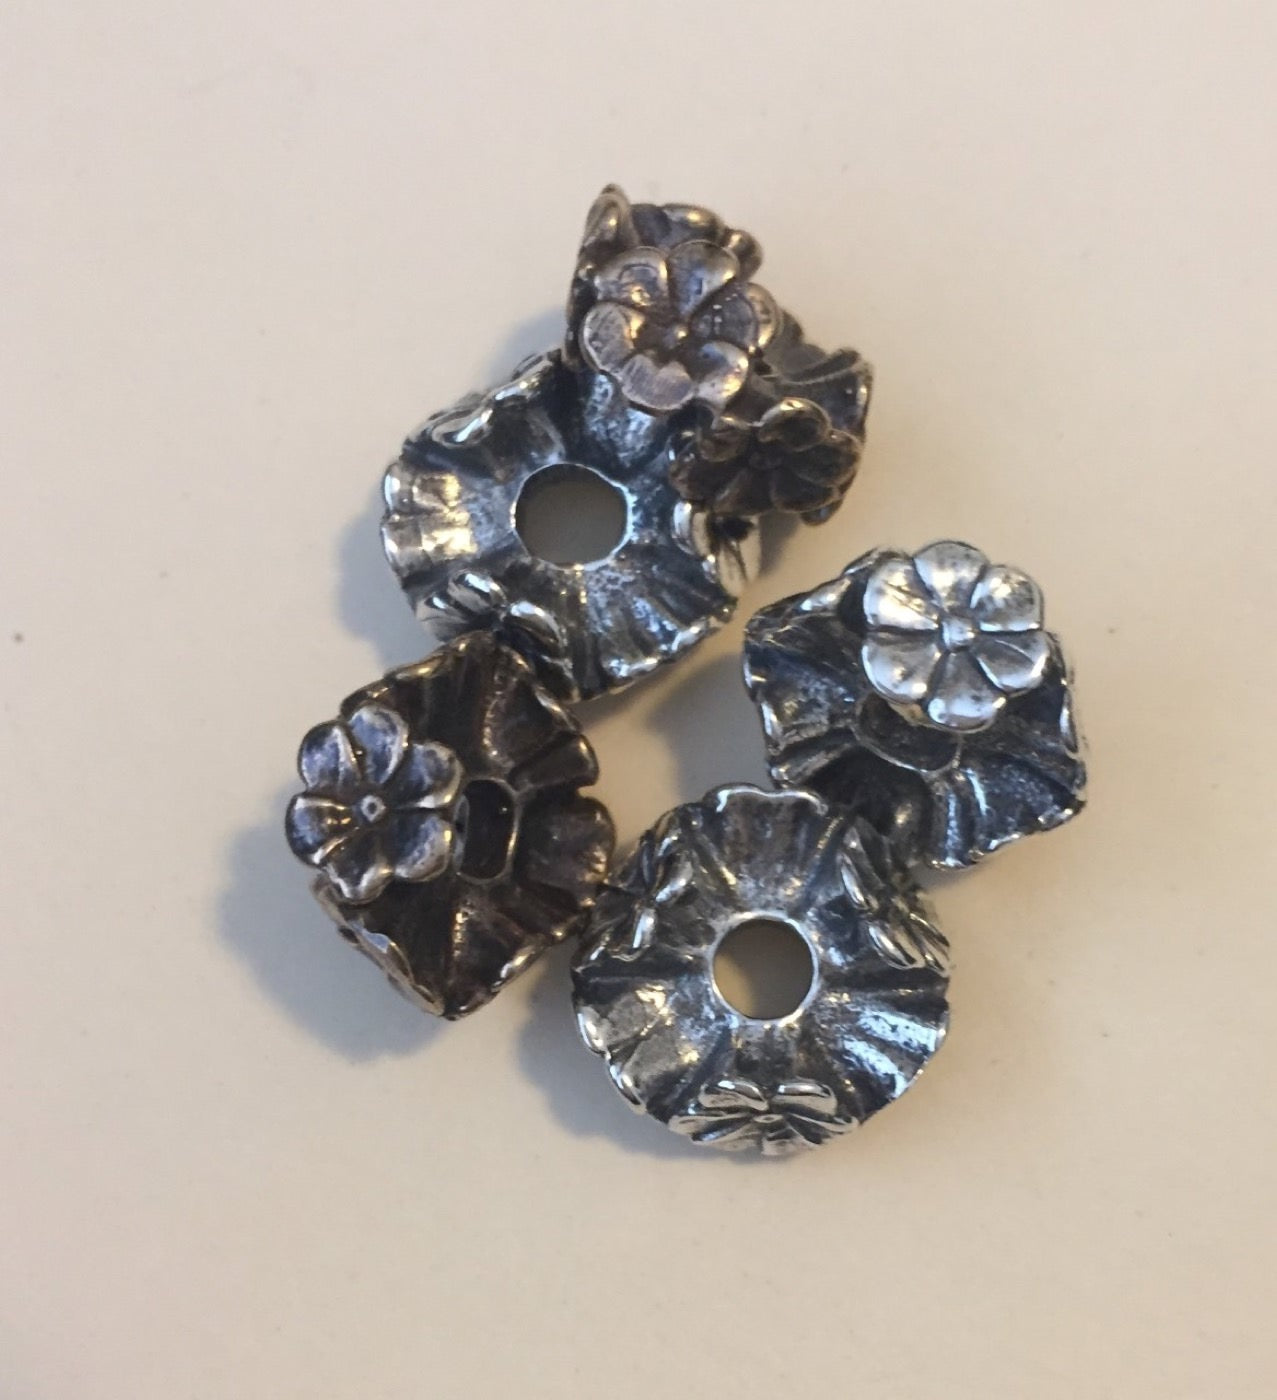 1545 SPACER/BEAD - Floral, Large and Beautiful